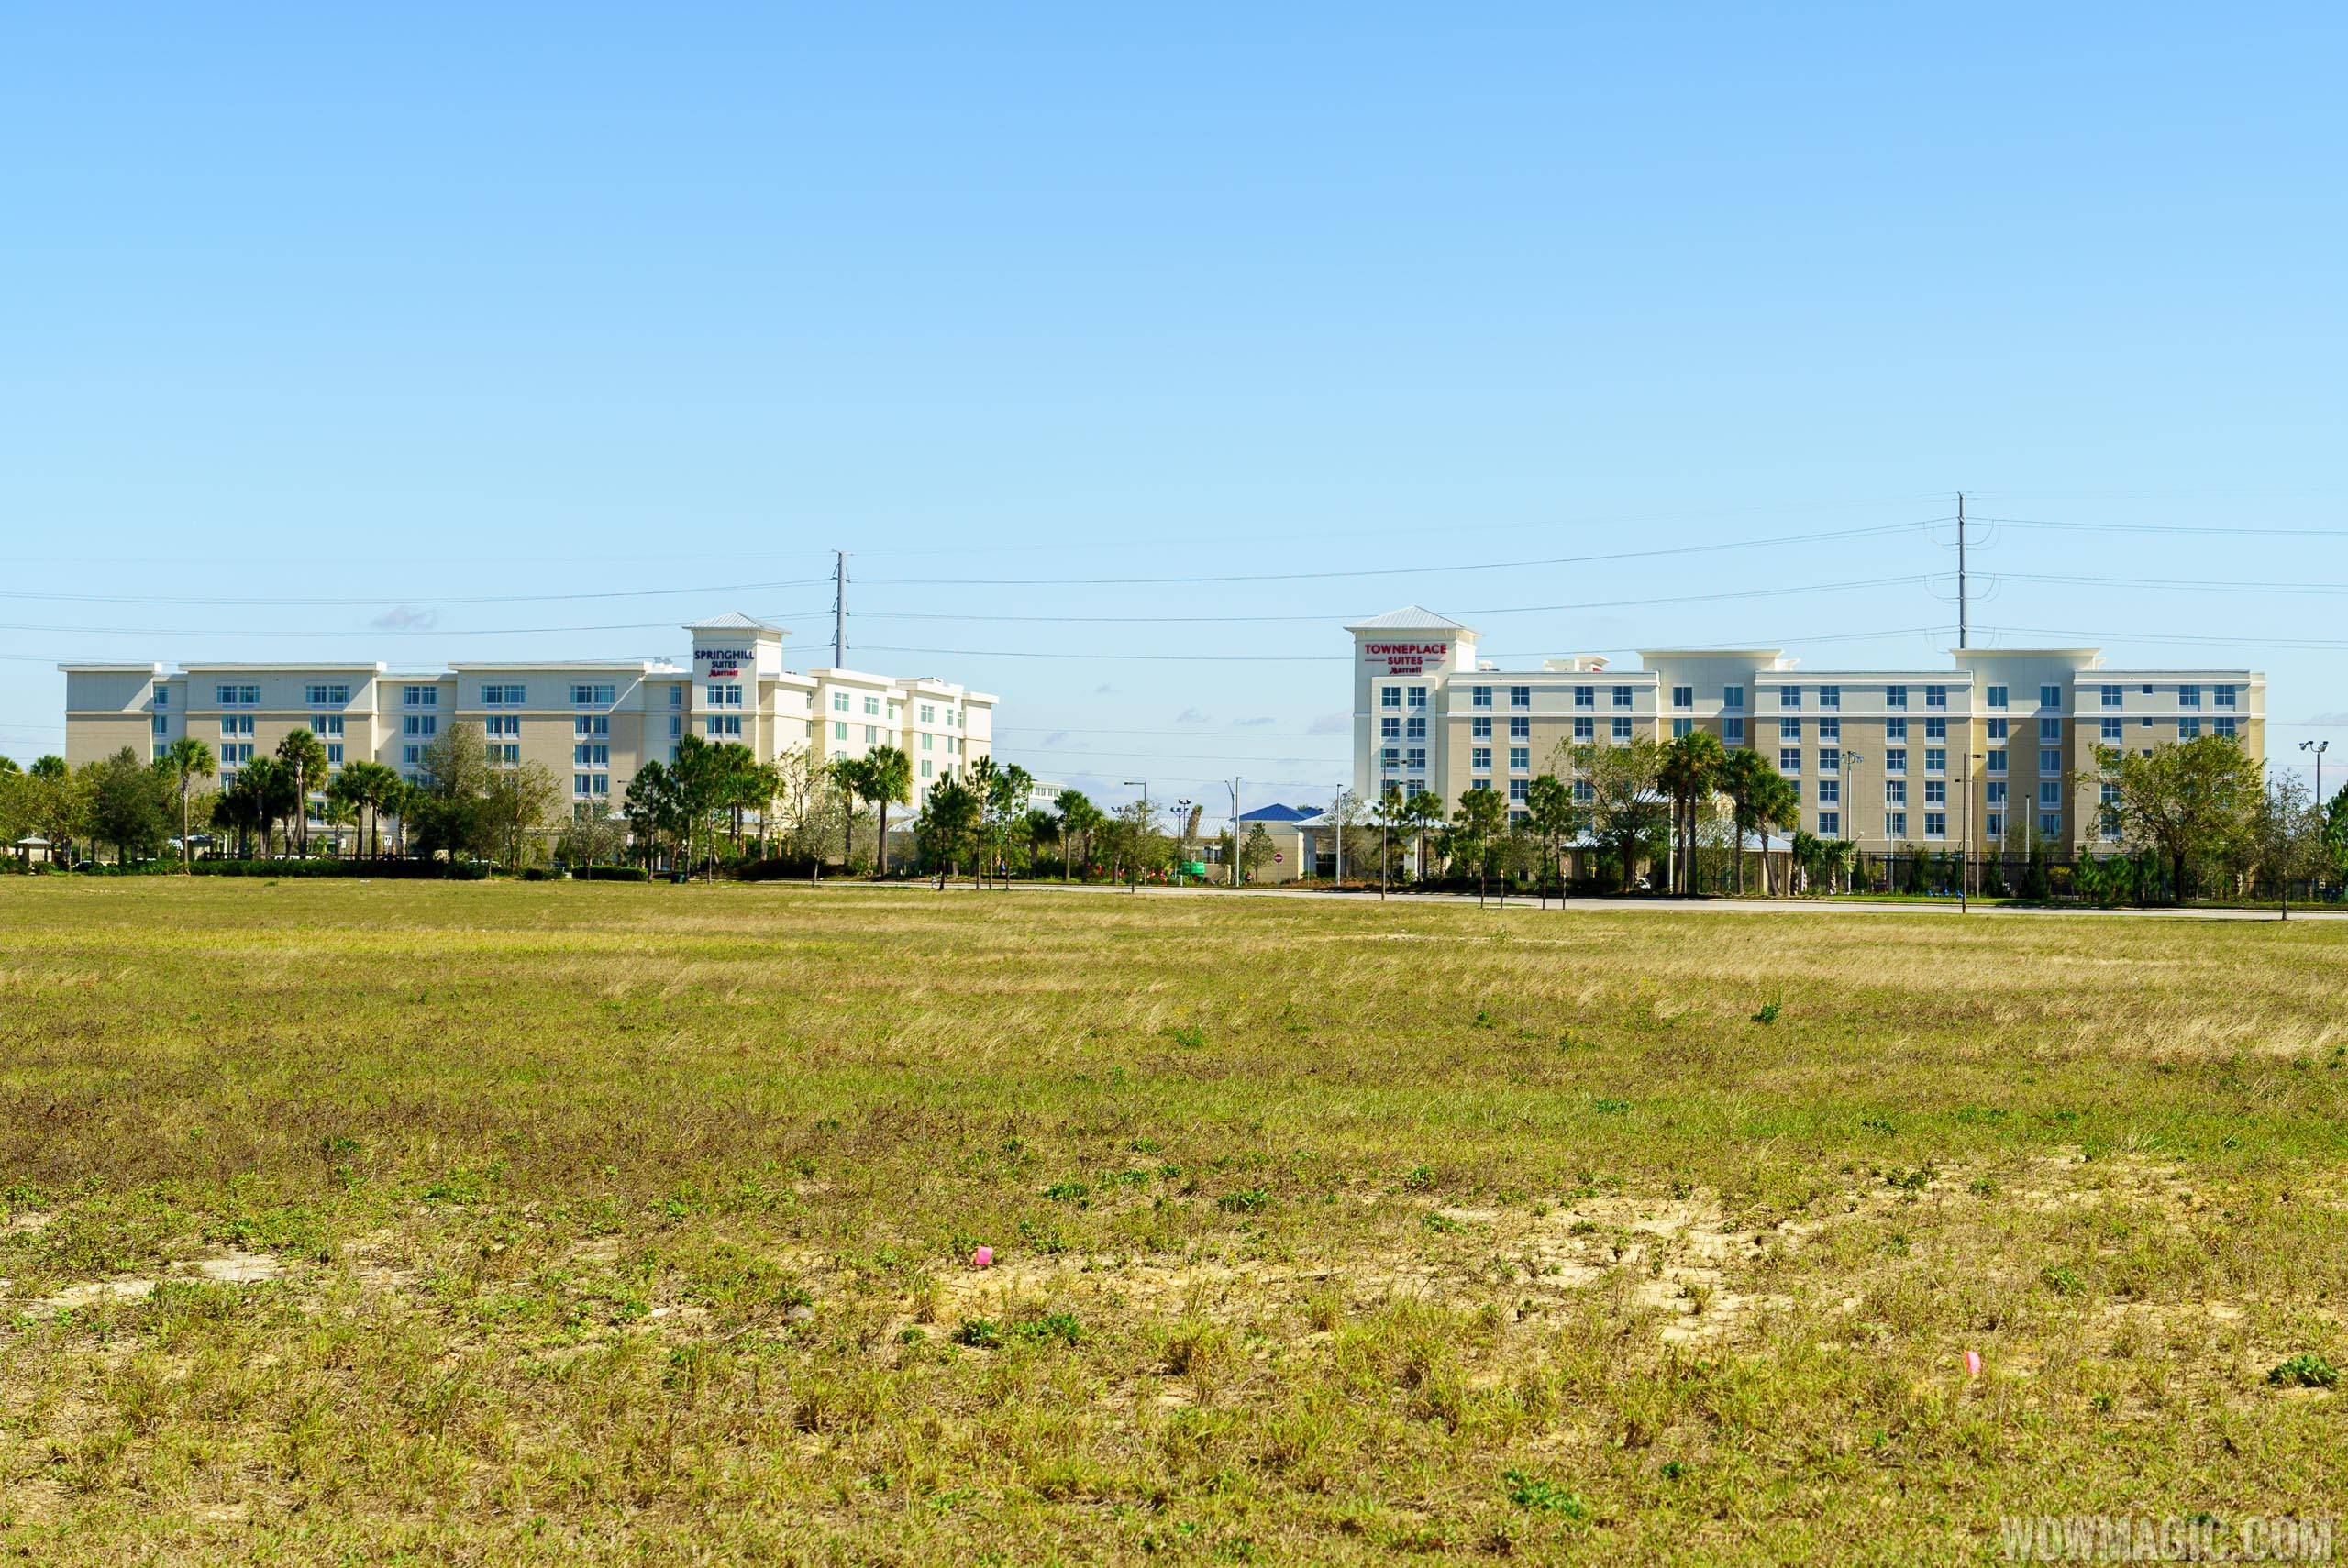 TownPlace Suites and SpringHill Suites at Flamingo Crossings